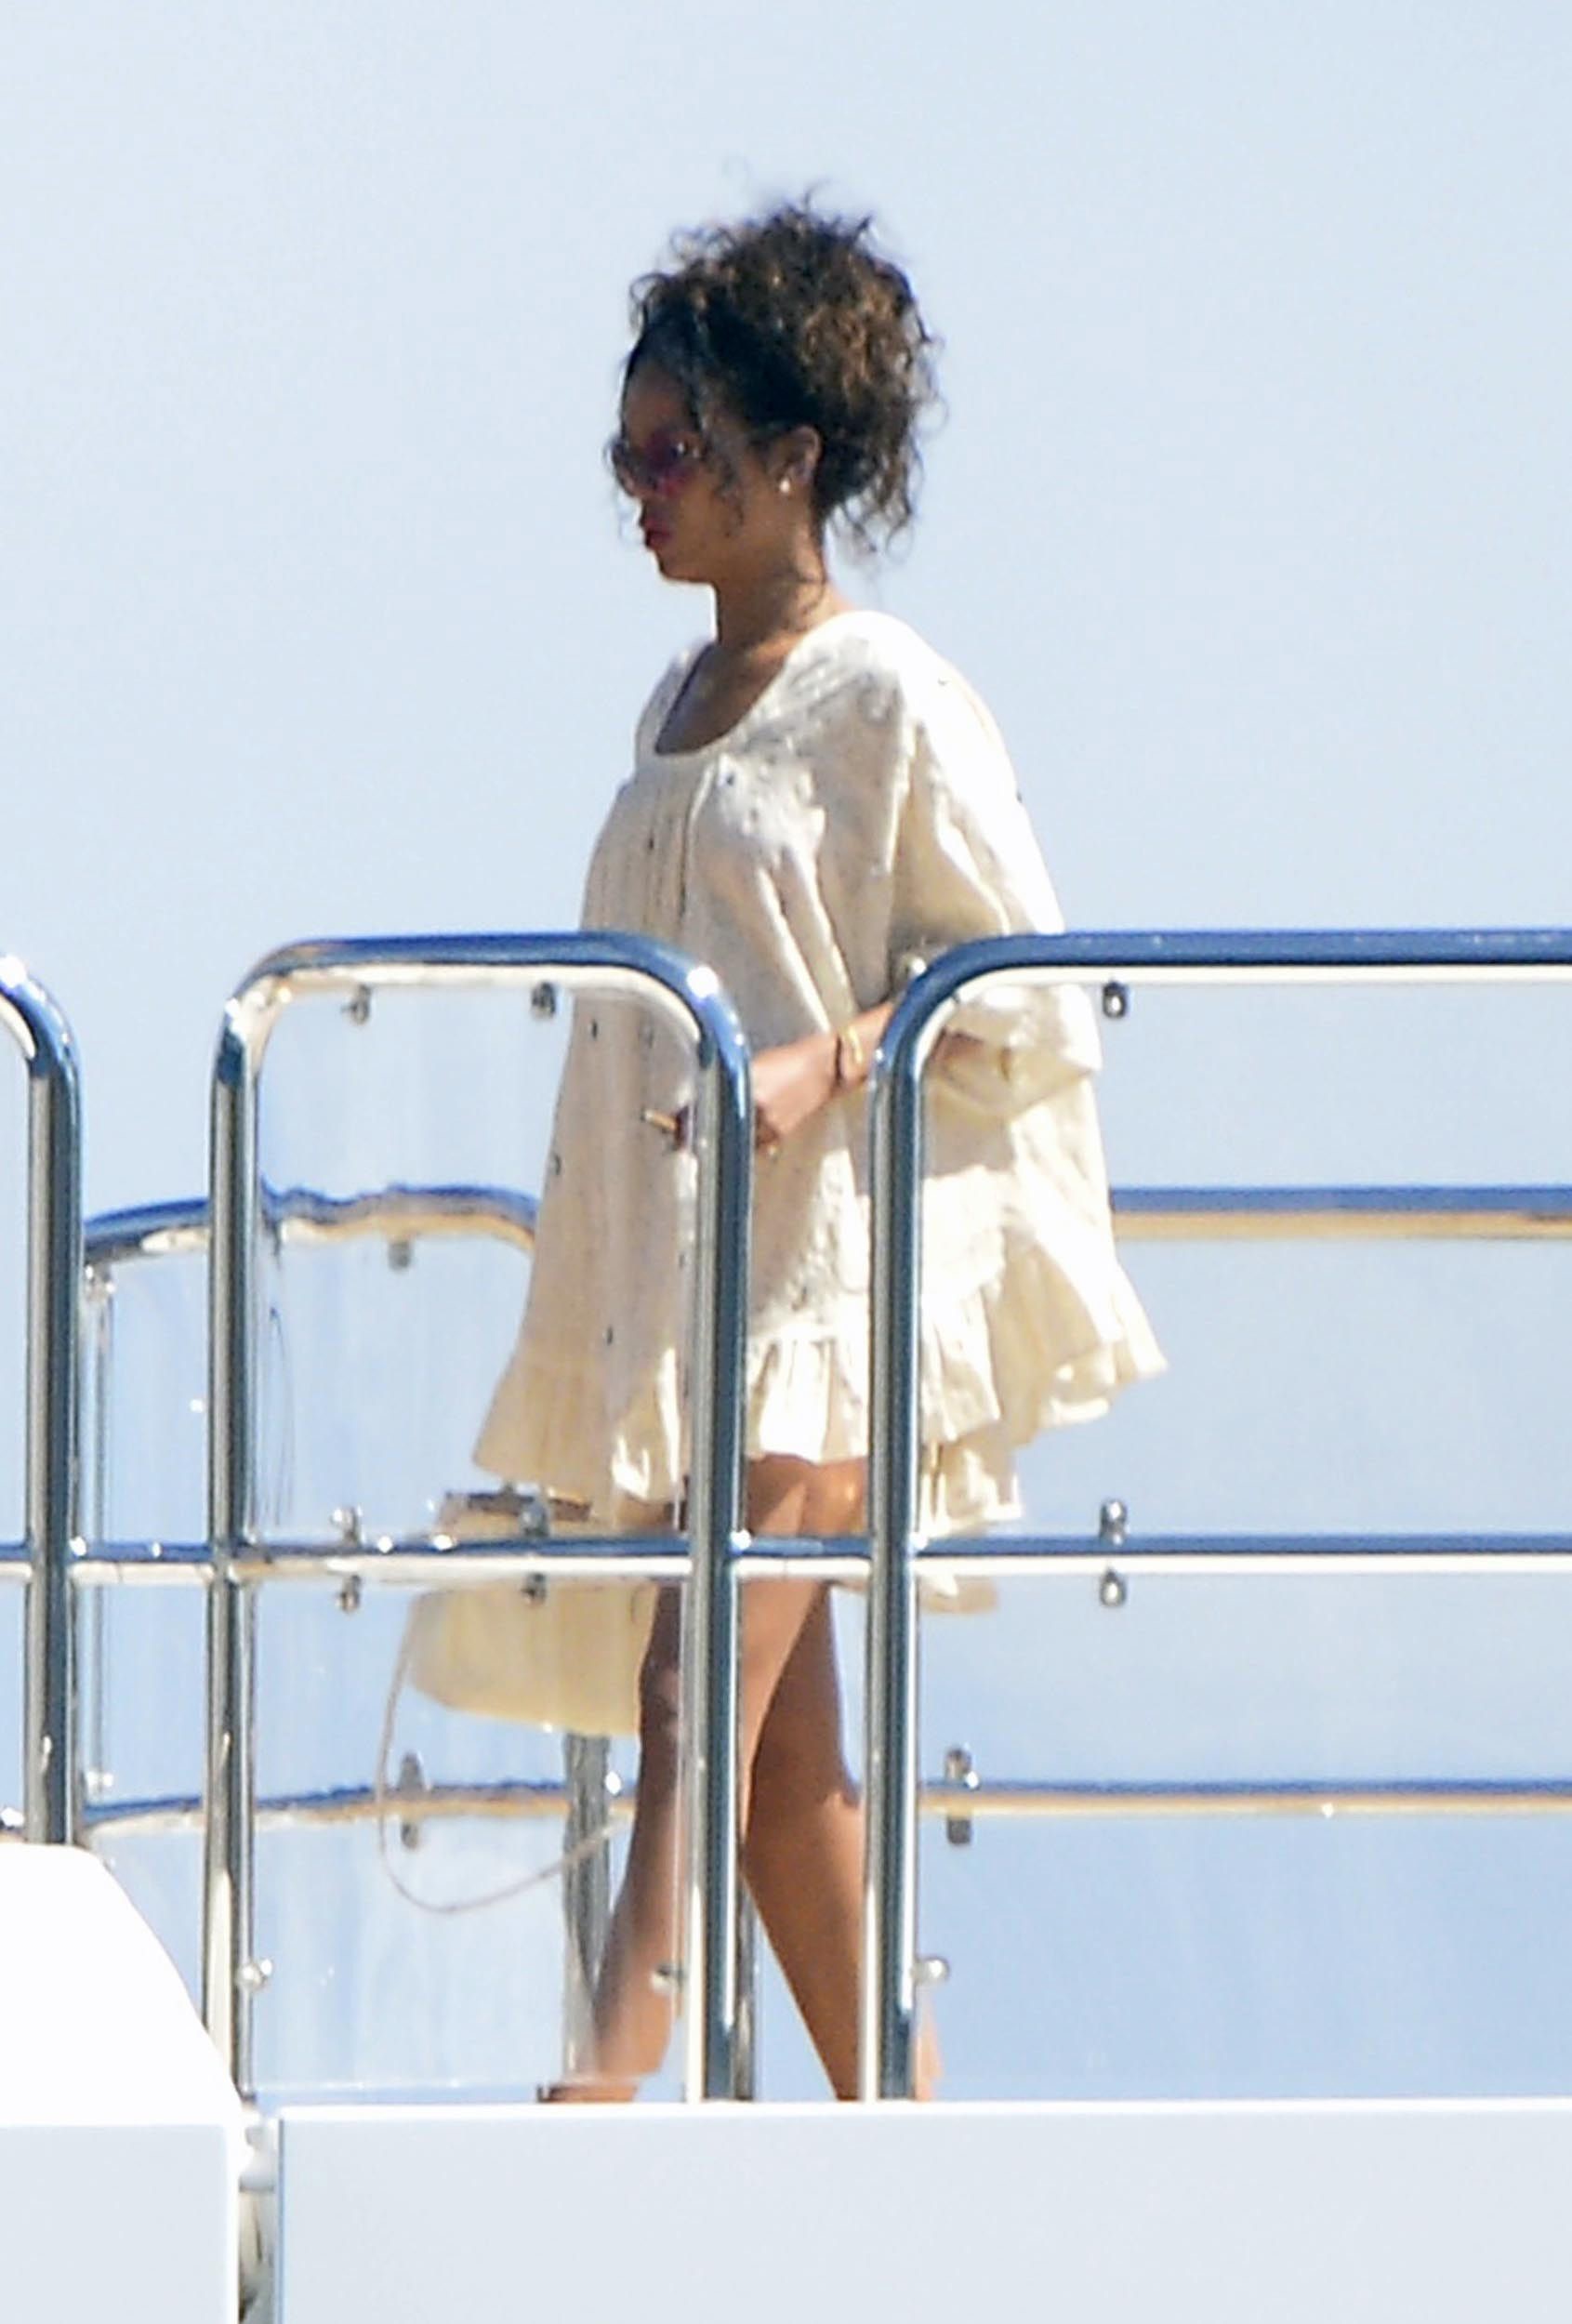 Rihanna Enjoying A Break On A Yacht In Ponza August 29 2014 Unrated